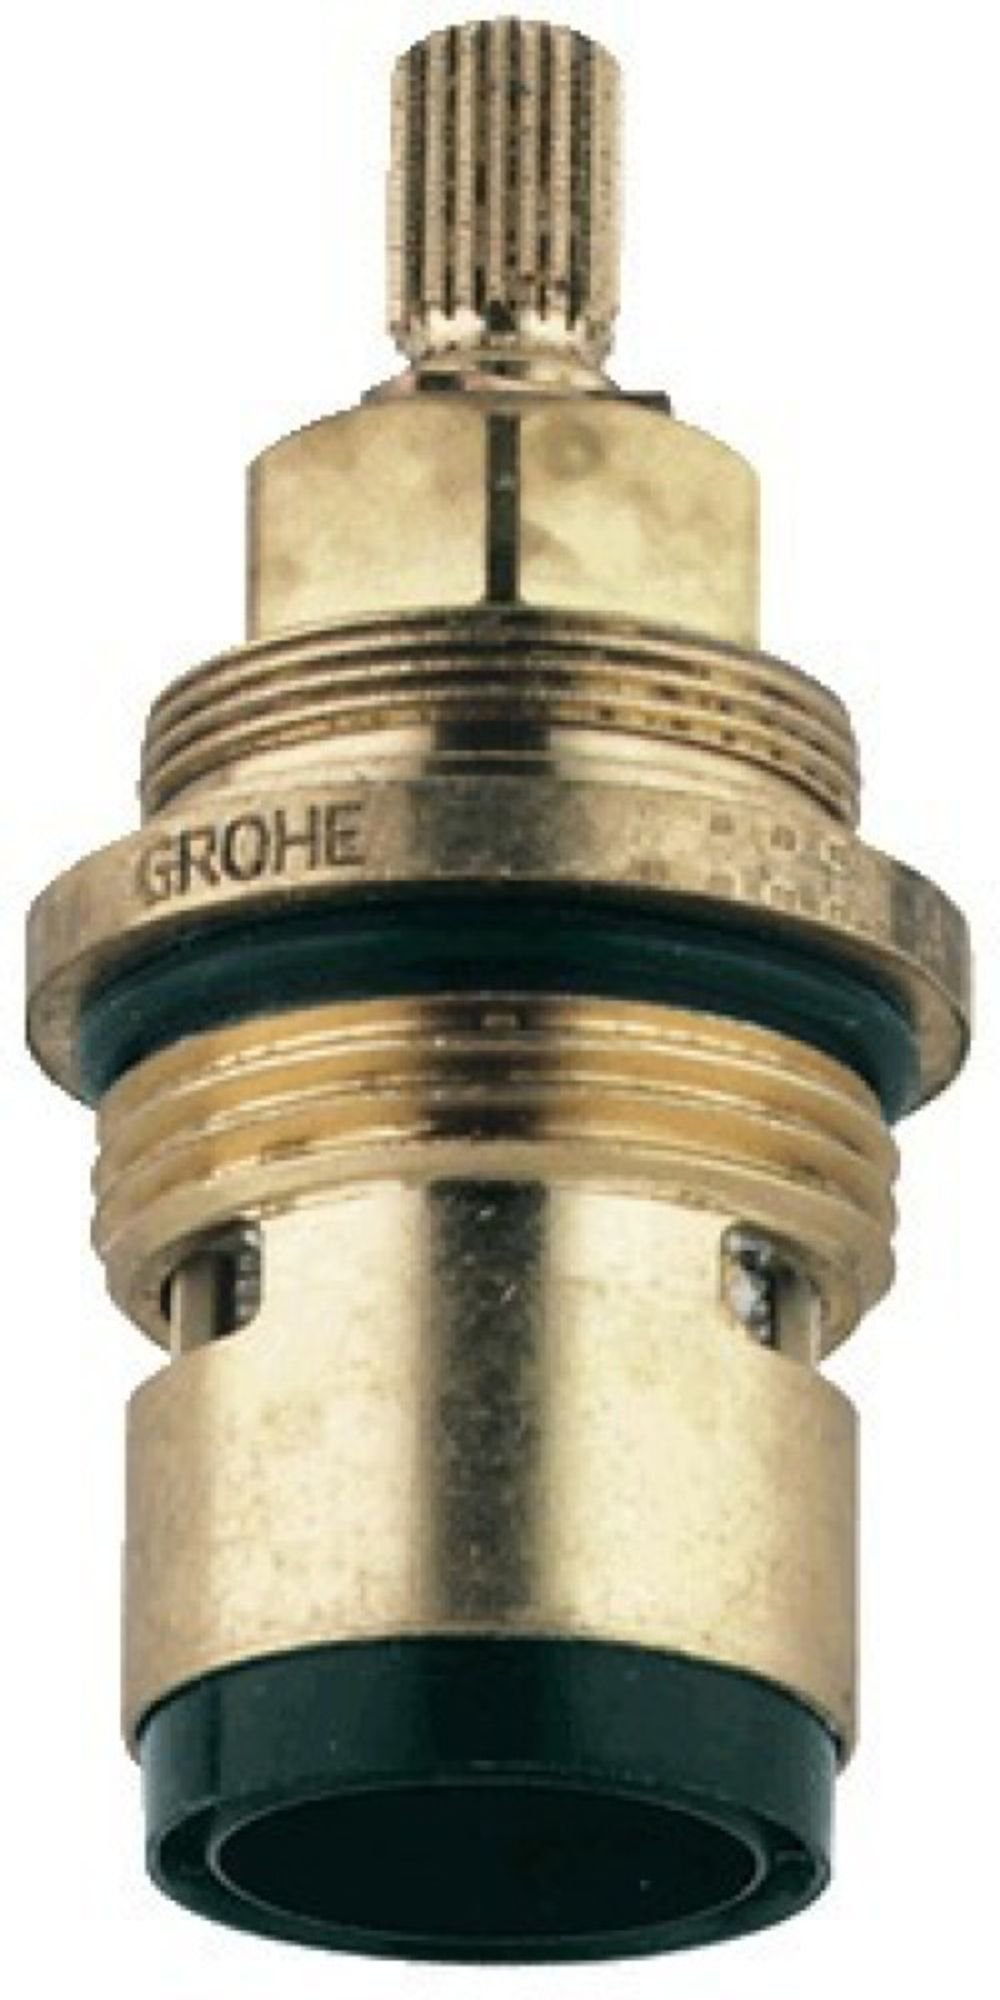 Grohe 45884 Cold 3/4" 1/2 Turn Headpart